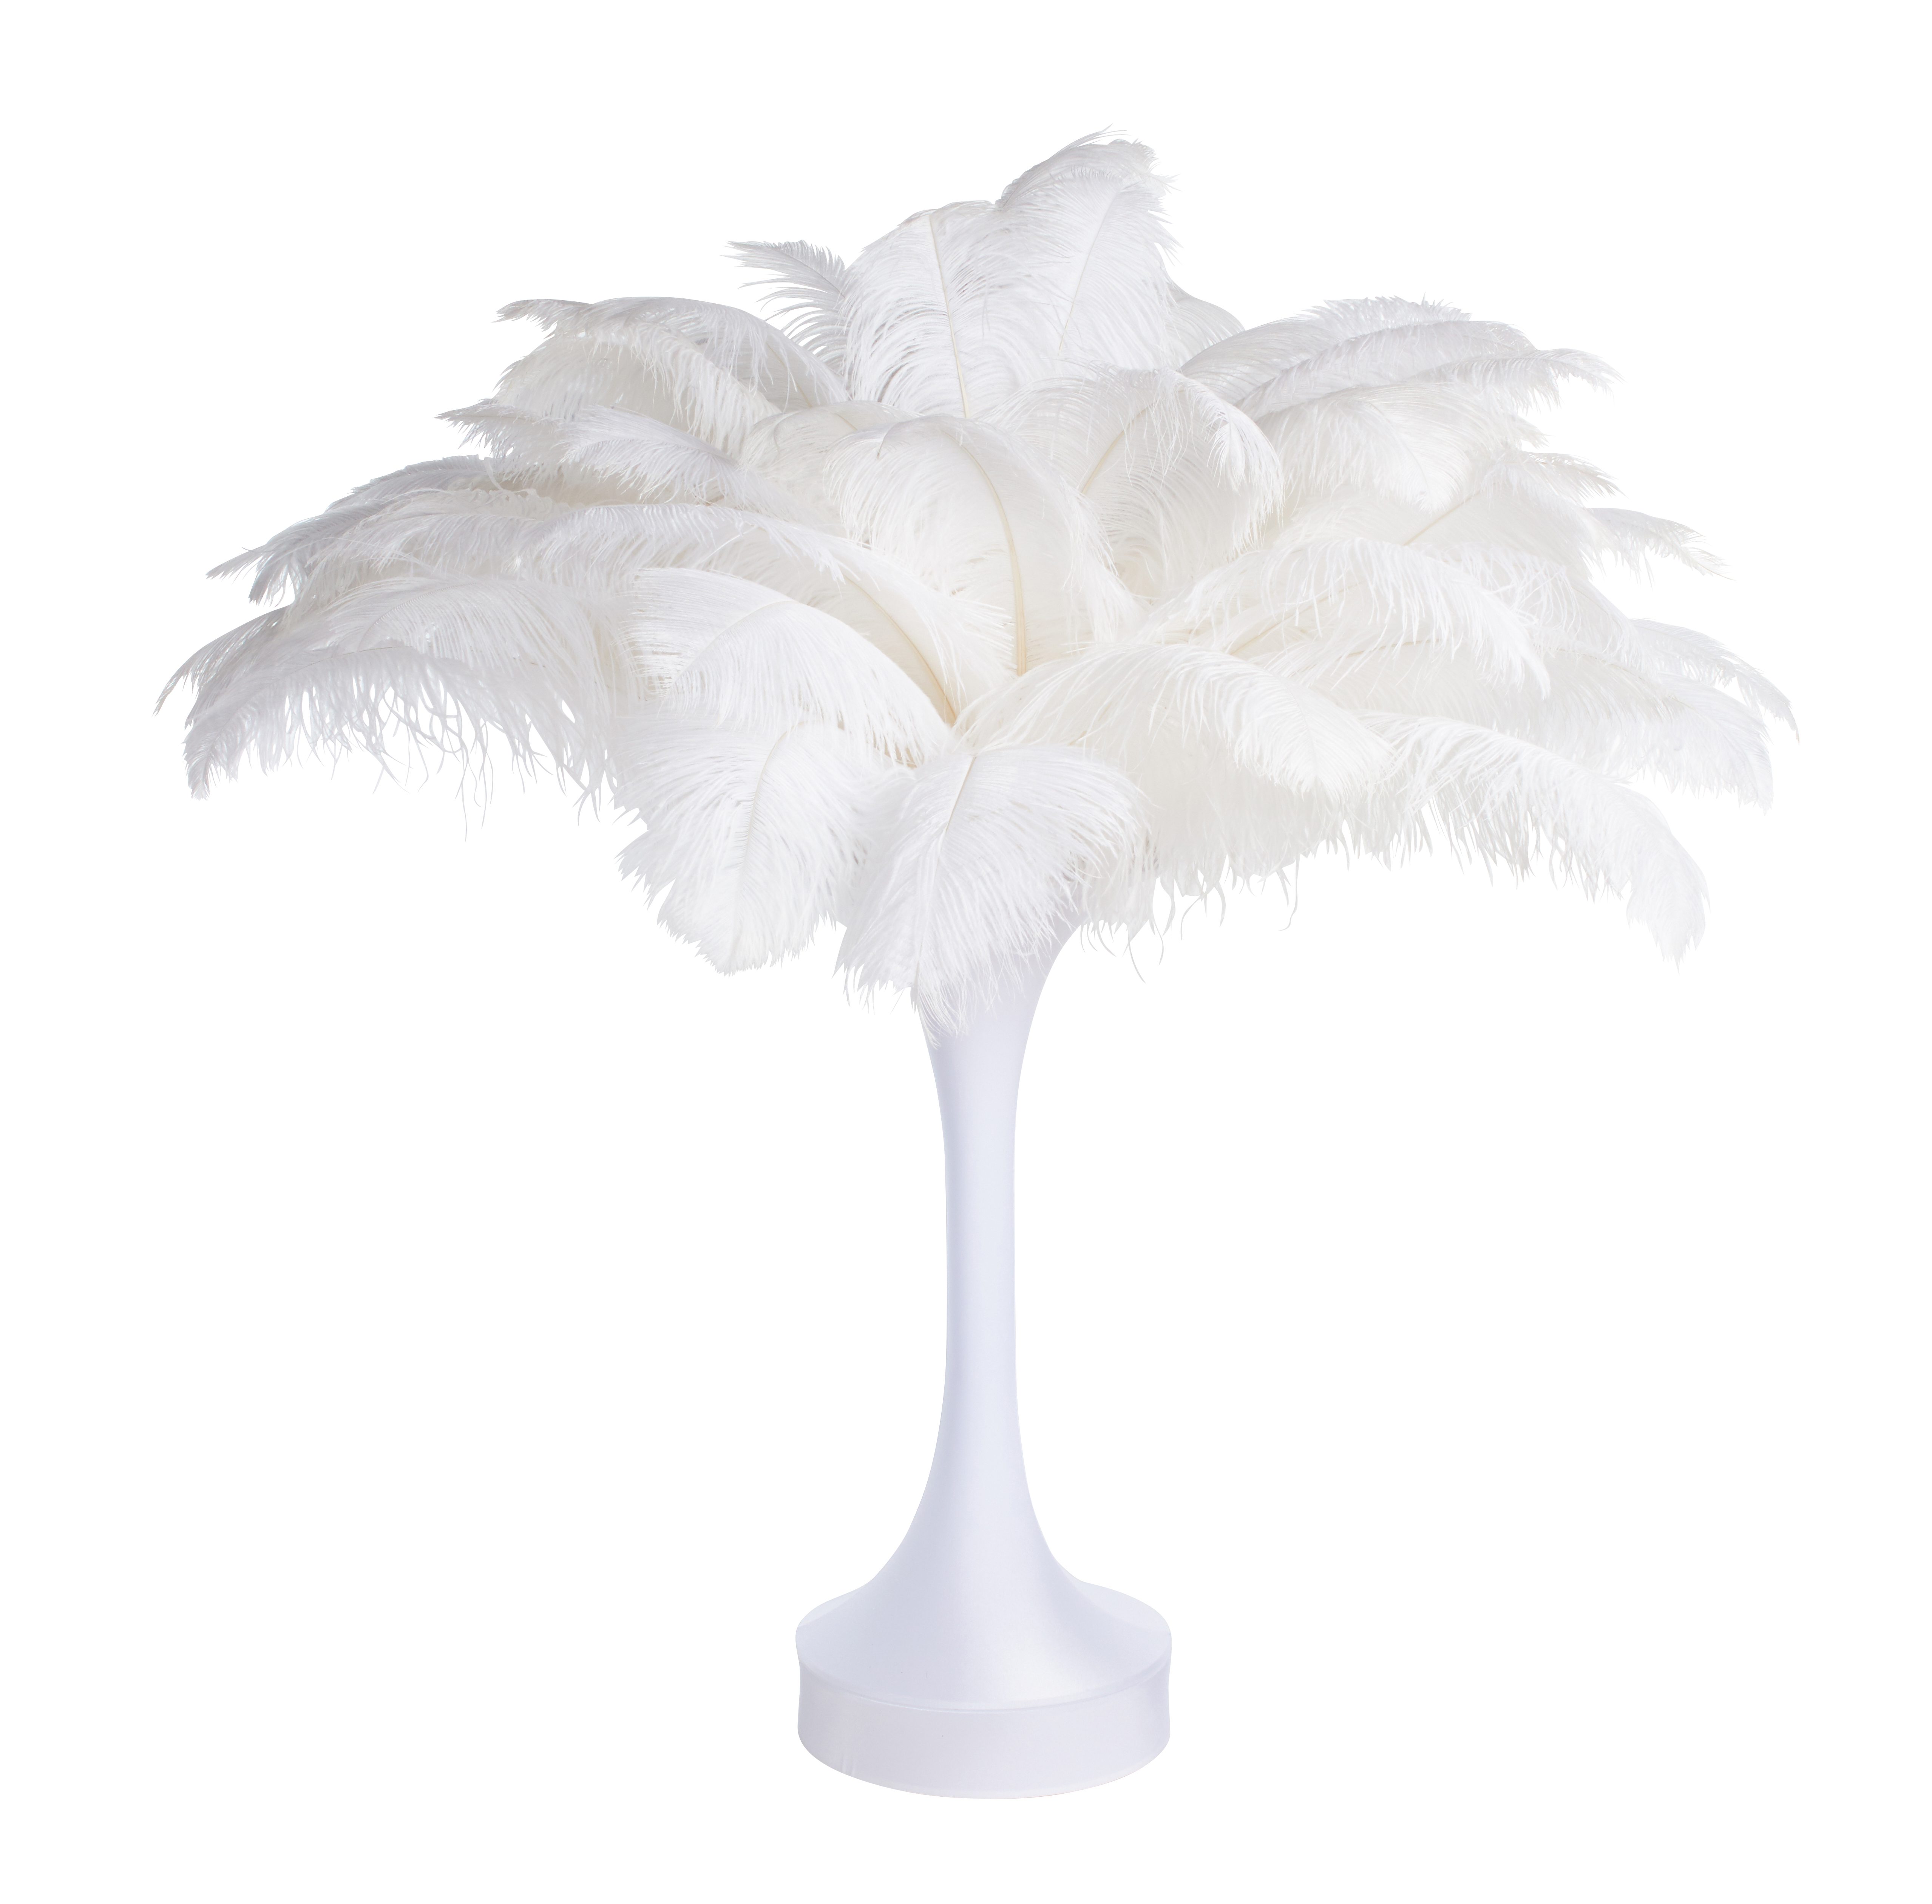 Feathers Spray Bloomer For Vase Decoration Synthetic White Feathers Latest